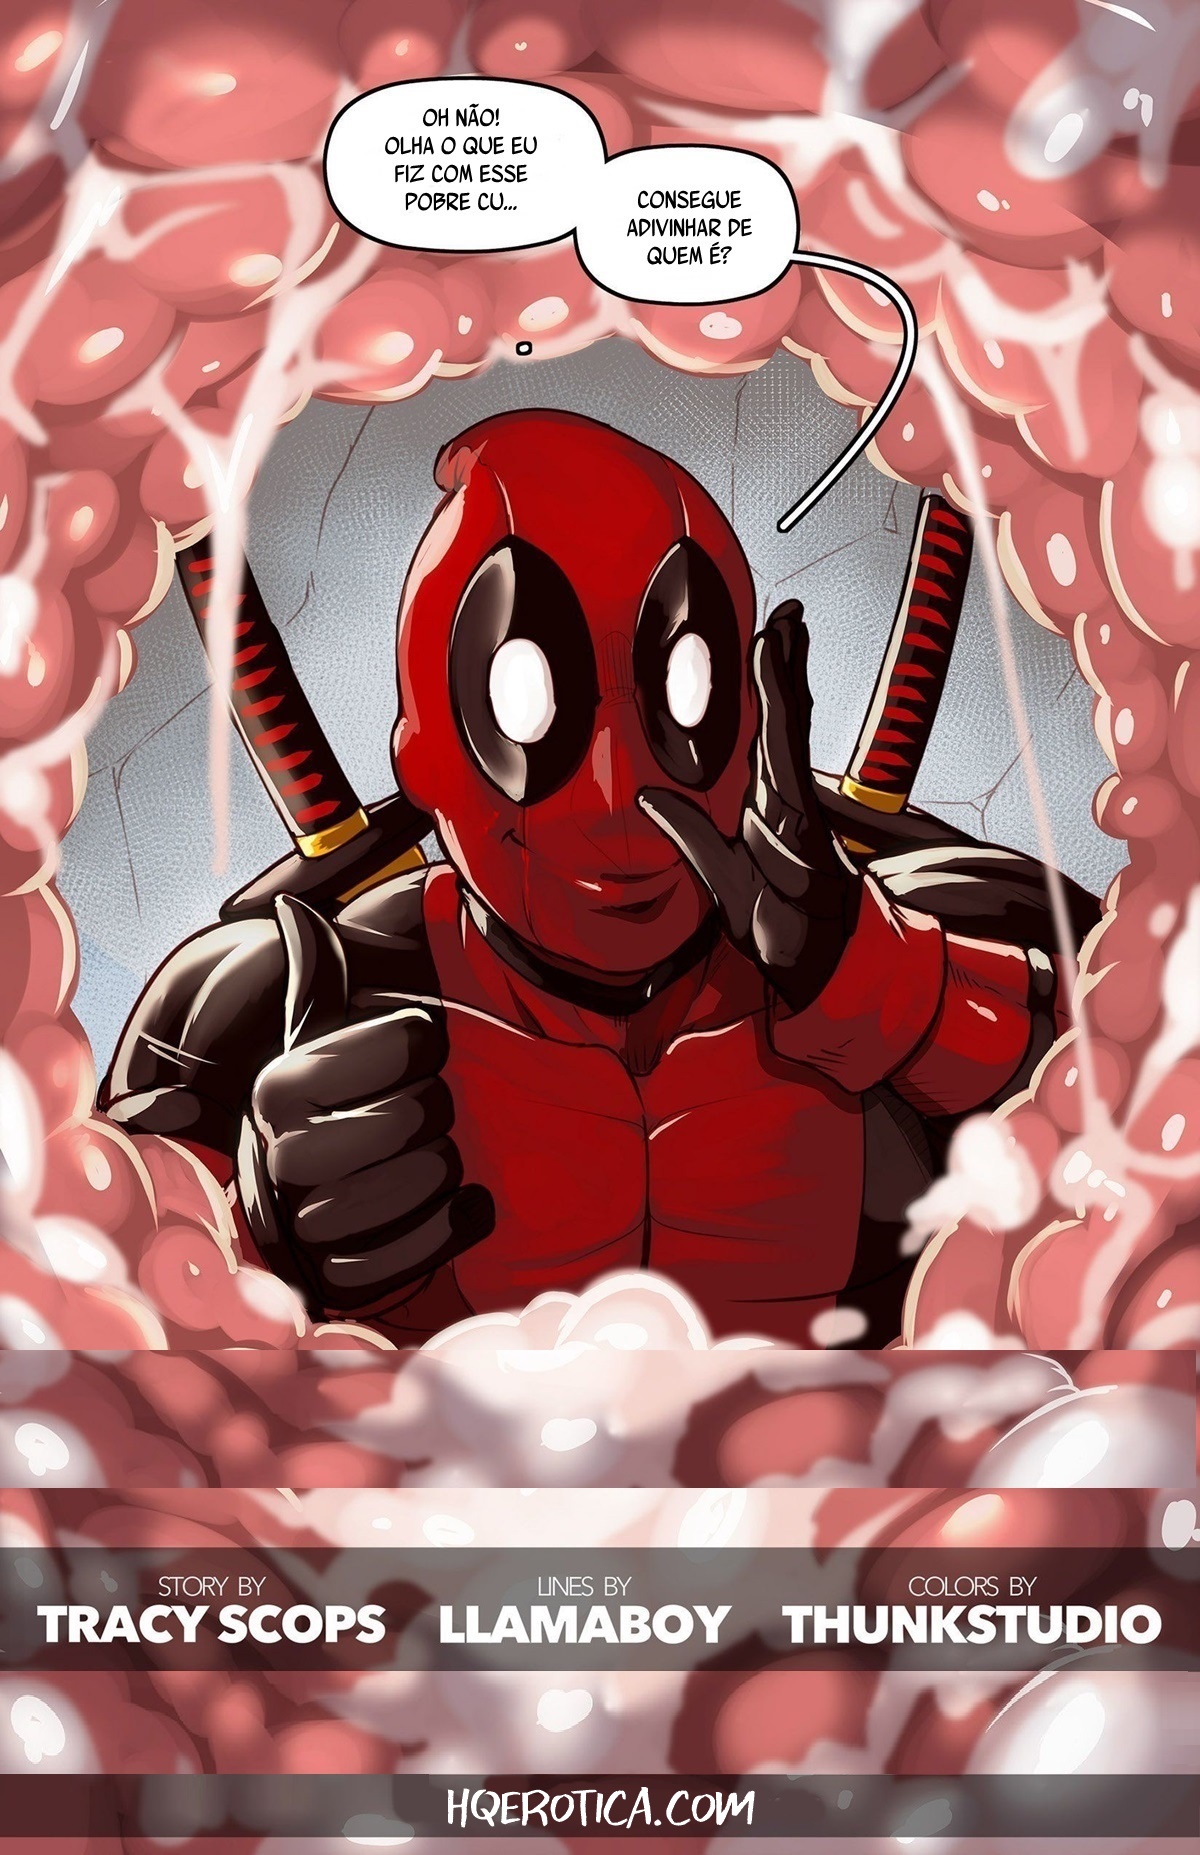 Deadpool Thinking with Portals - 3